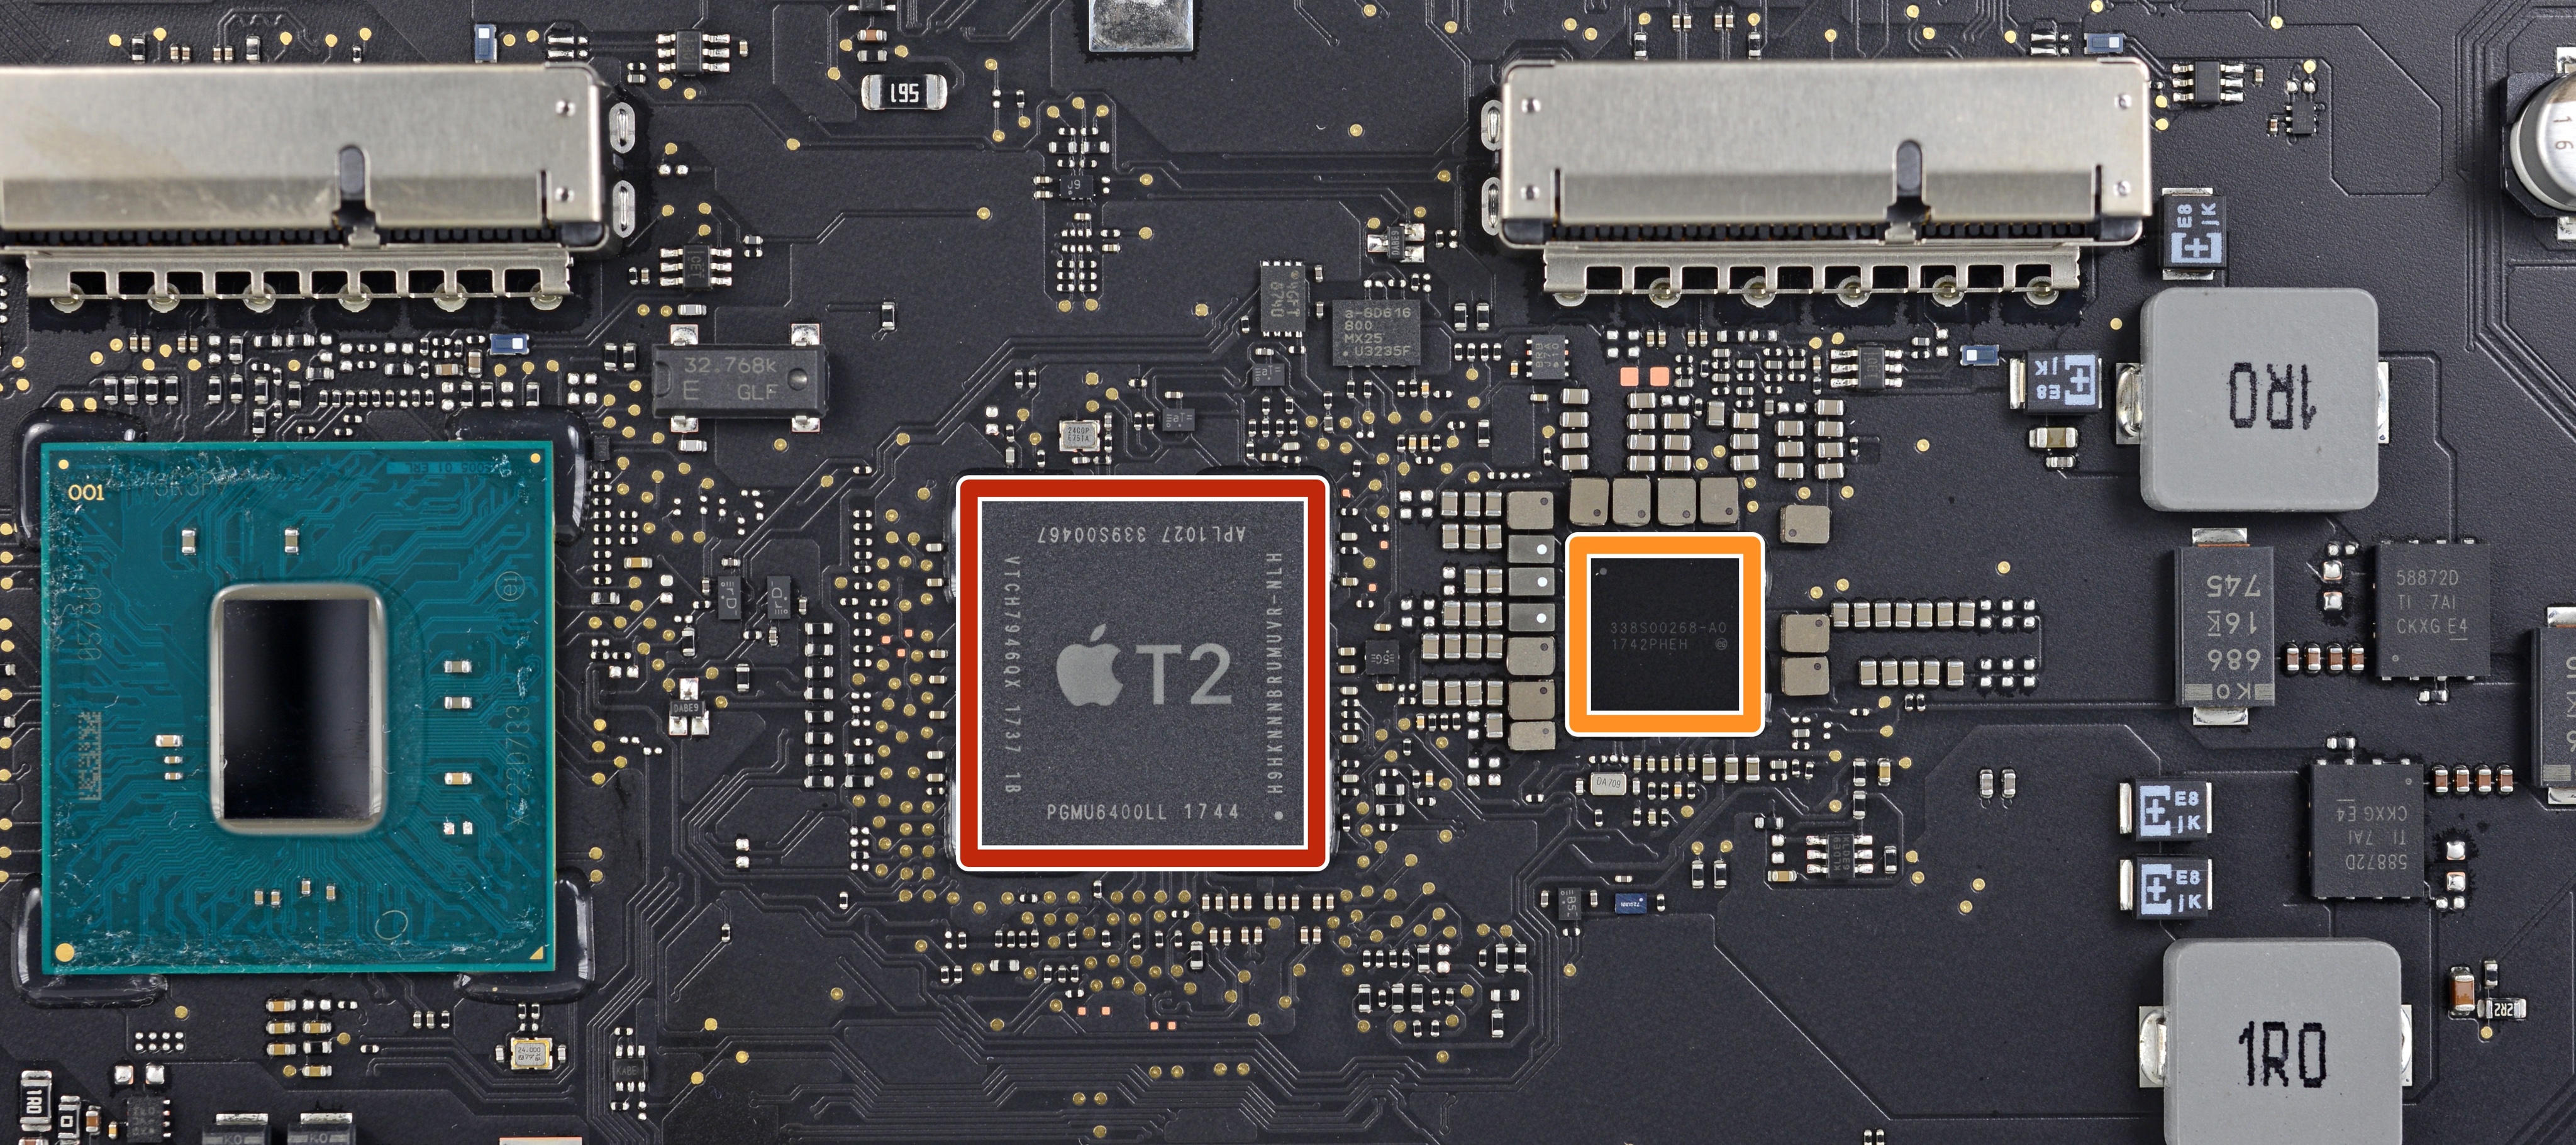 Mac models with T2 chip include iMac Pro